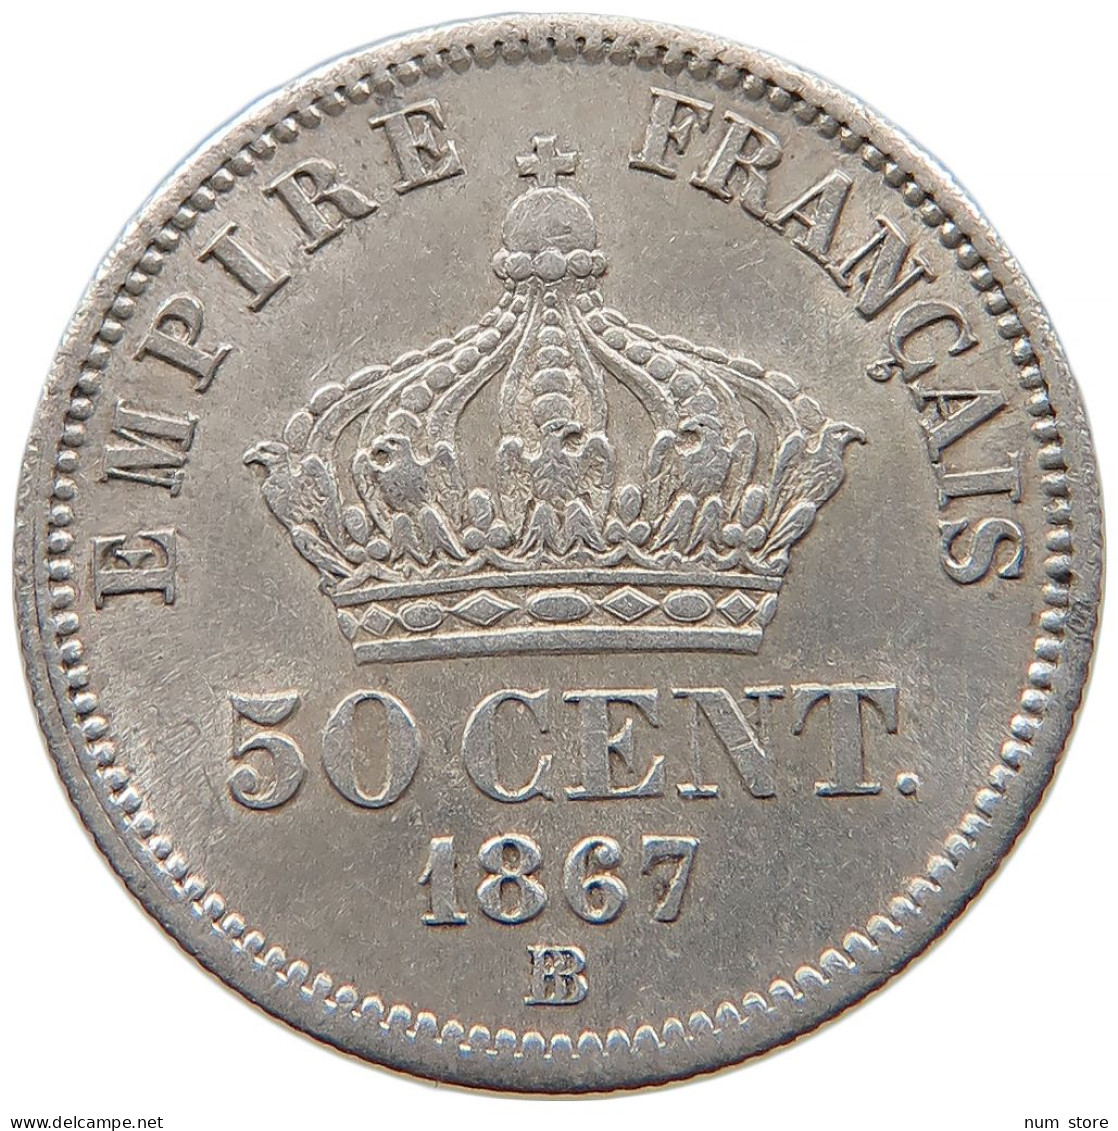 FRANCE 50 CENTIMES 1867 BB Napoleon III. (1852-1870) #t022 0541 - 50 Centimes